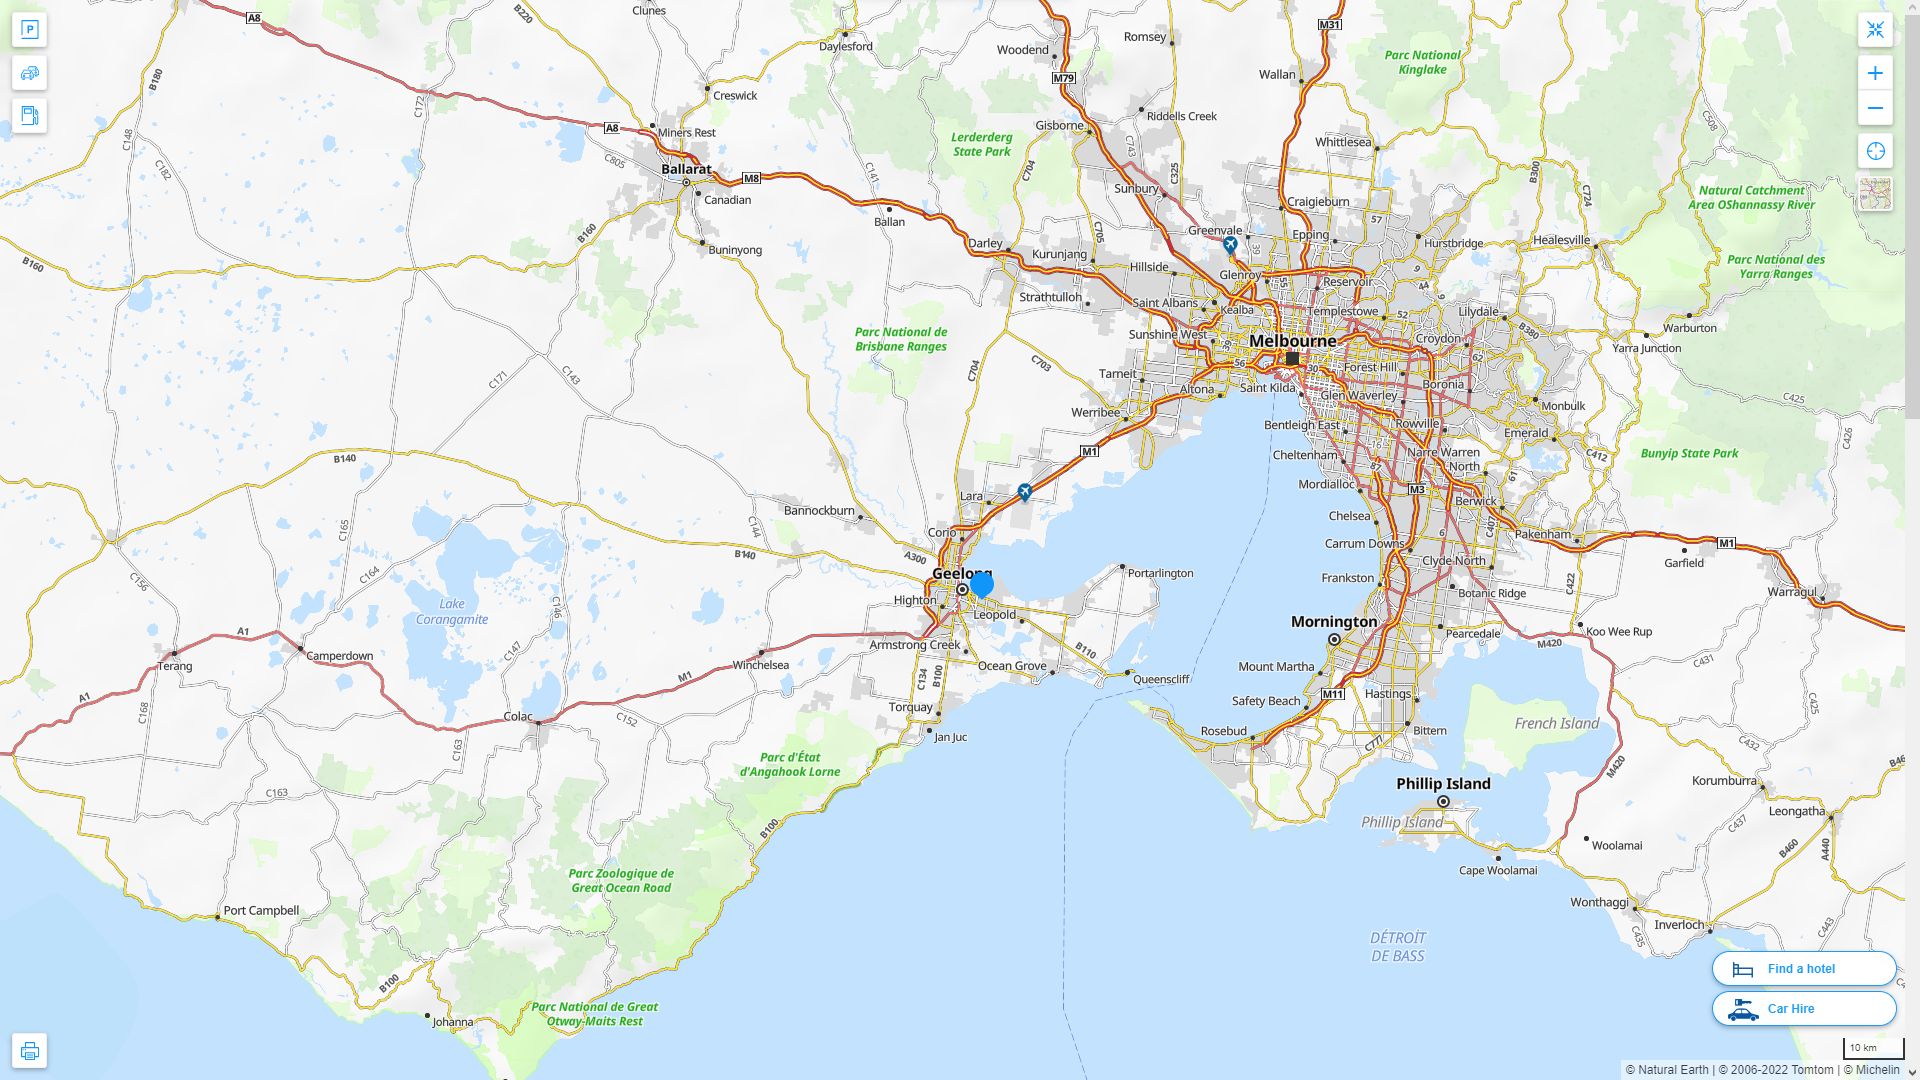 Geelong Highway and Road Map